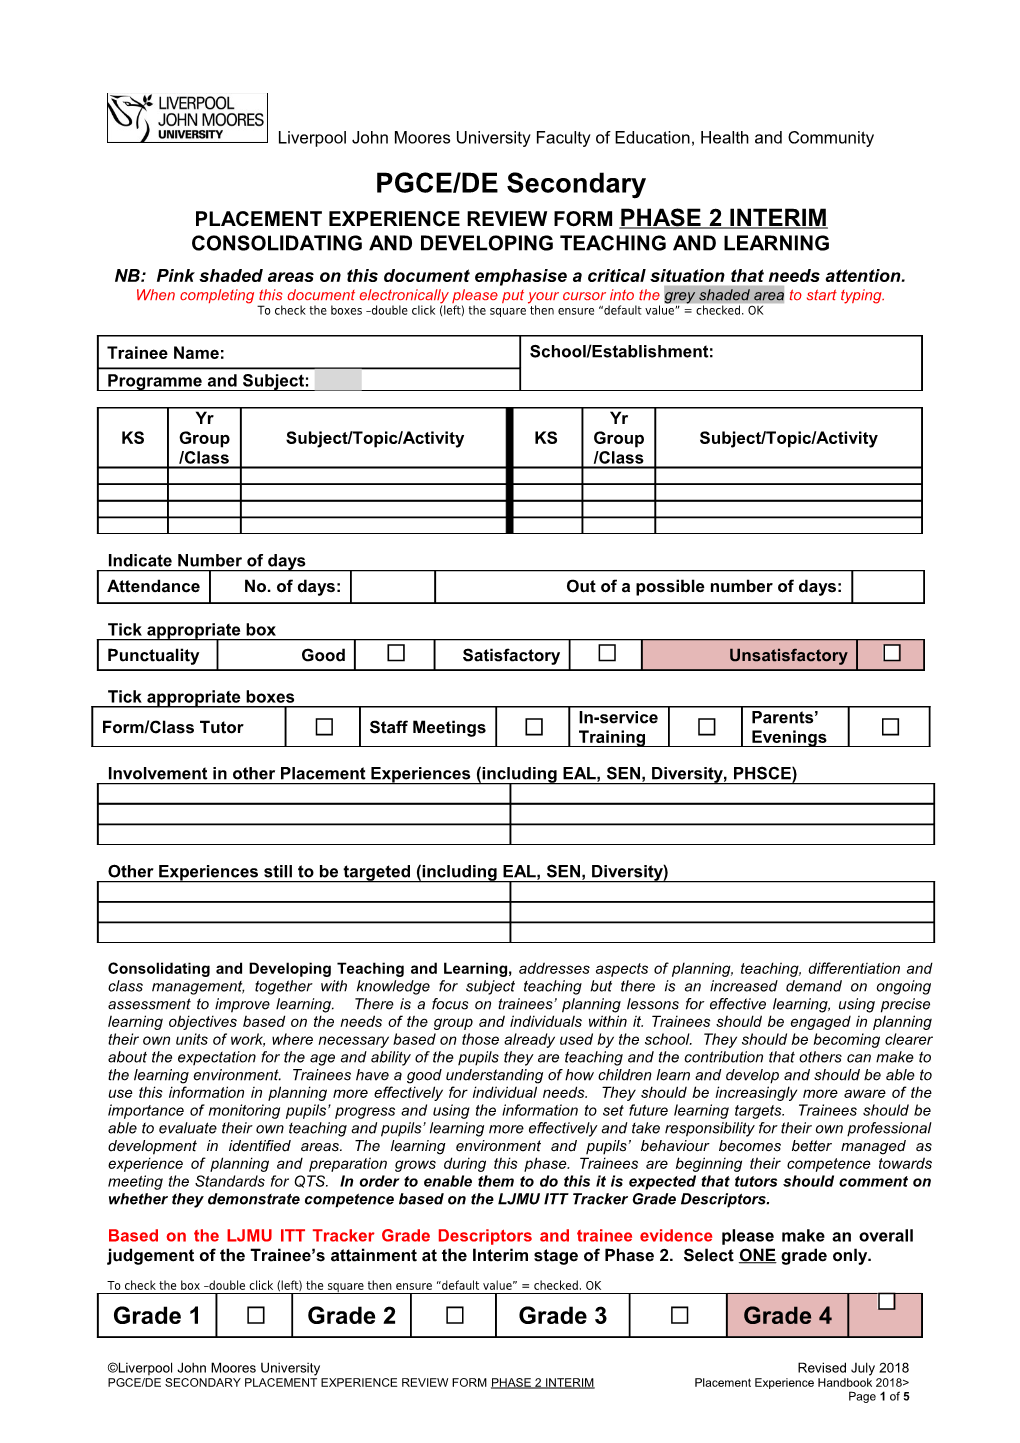 Placement Experience Review Form Phase 2Interim